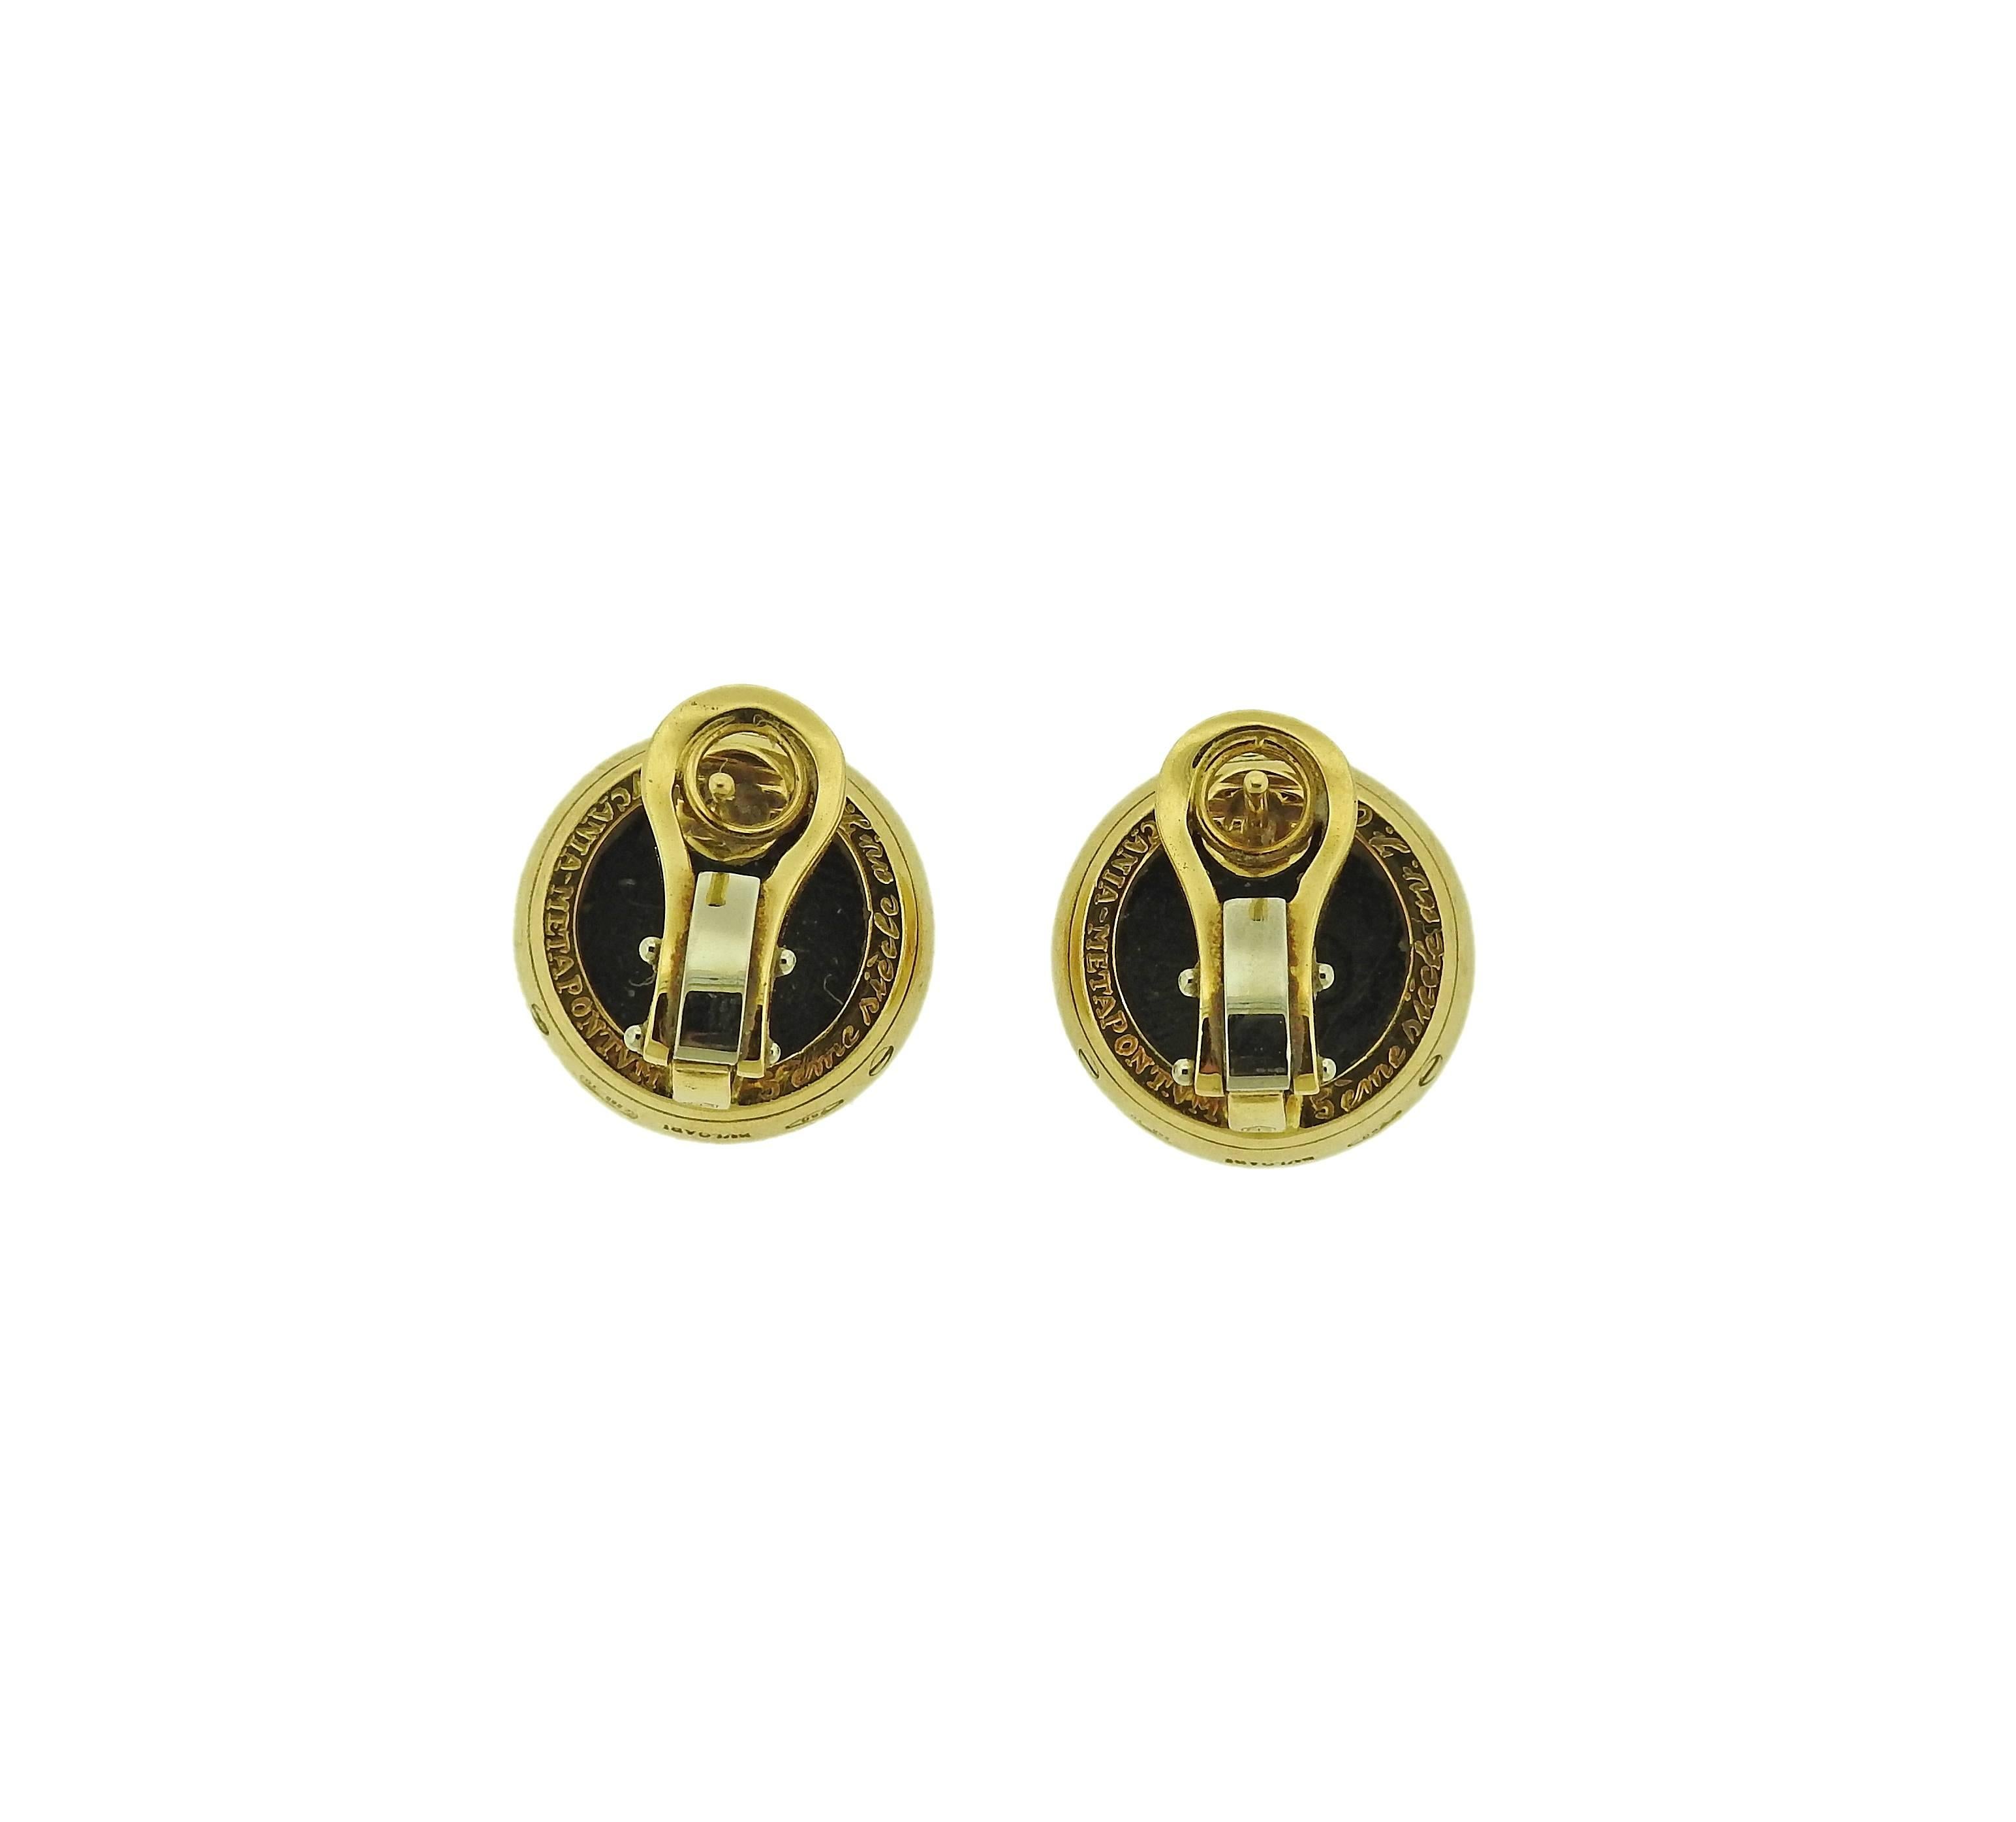 Pair of 18k yellow gold earrings, crafted by Bulgari, set with Lucania-Metapontum ancient coins. Earrings are 16mm in diameter , Weigh 20.2 grams. Lucania-Metapontum, 5 cent.siecle en L. C., 269TO, 750, Bvlgari 